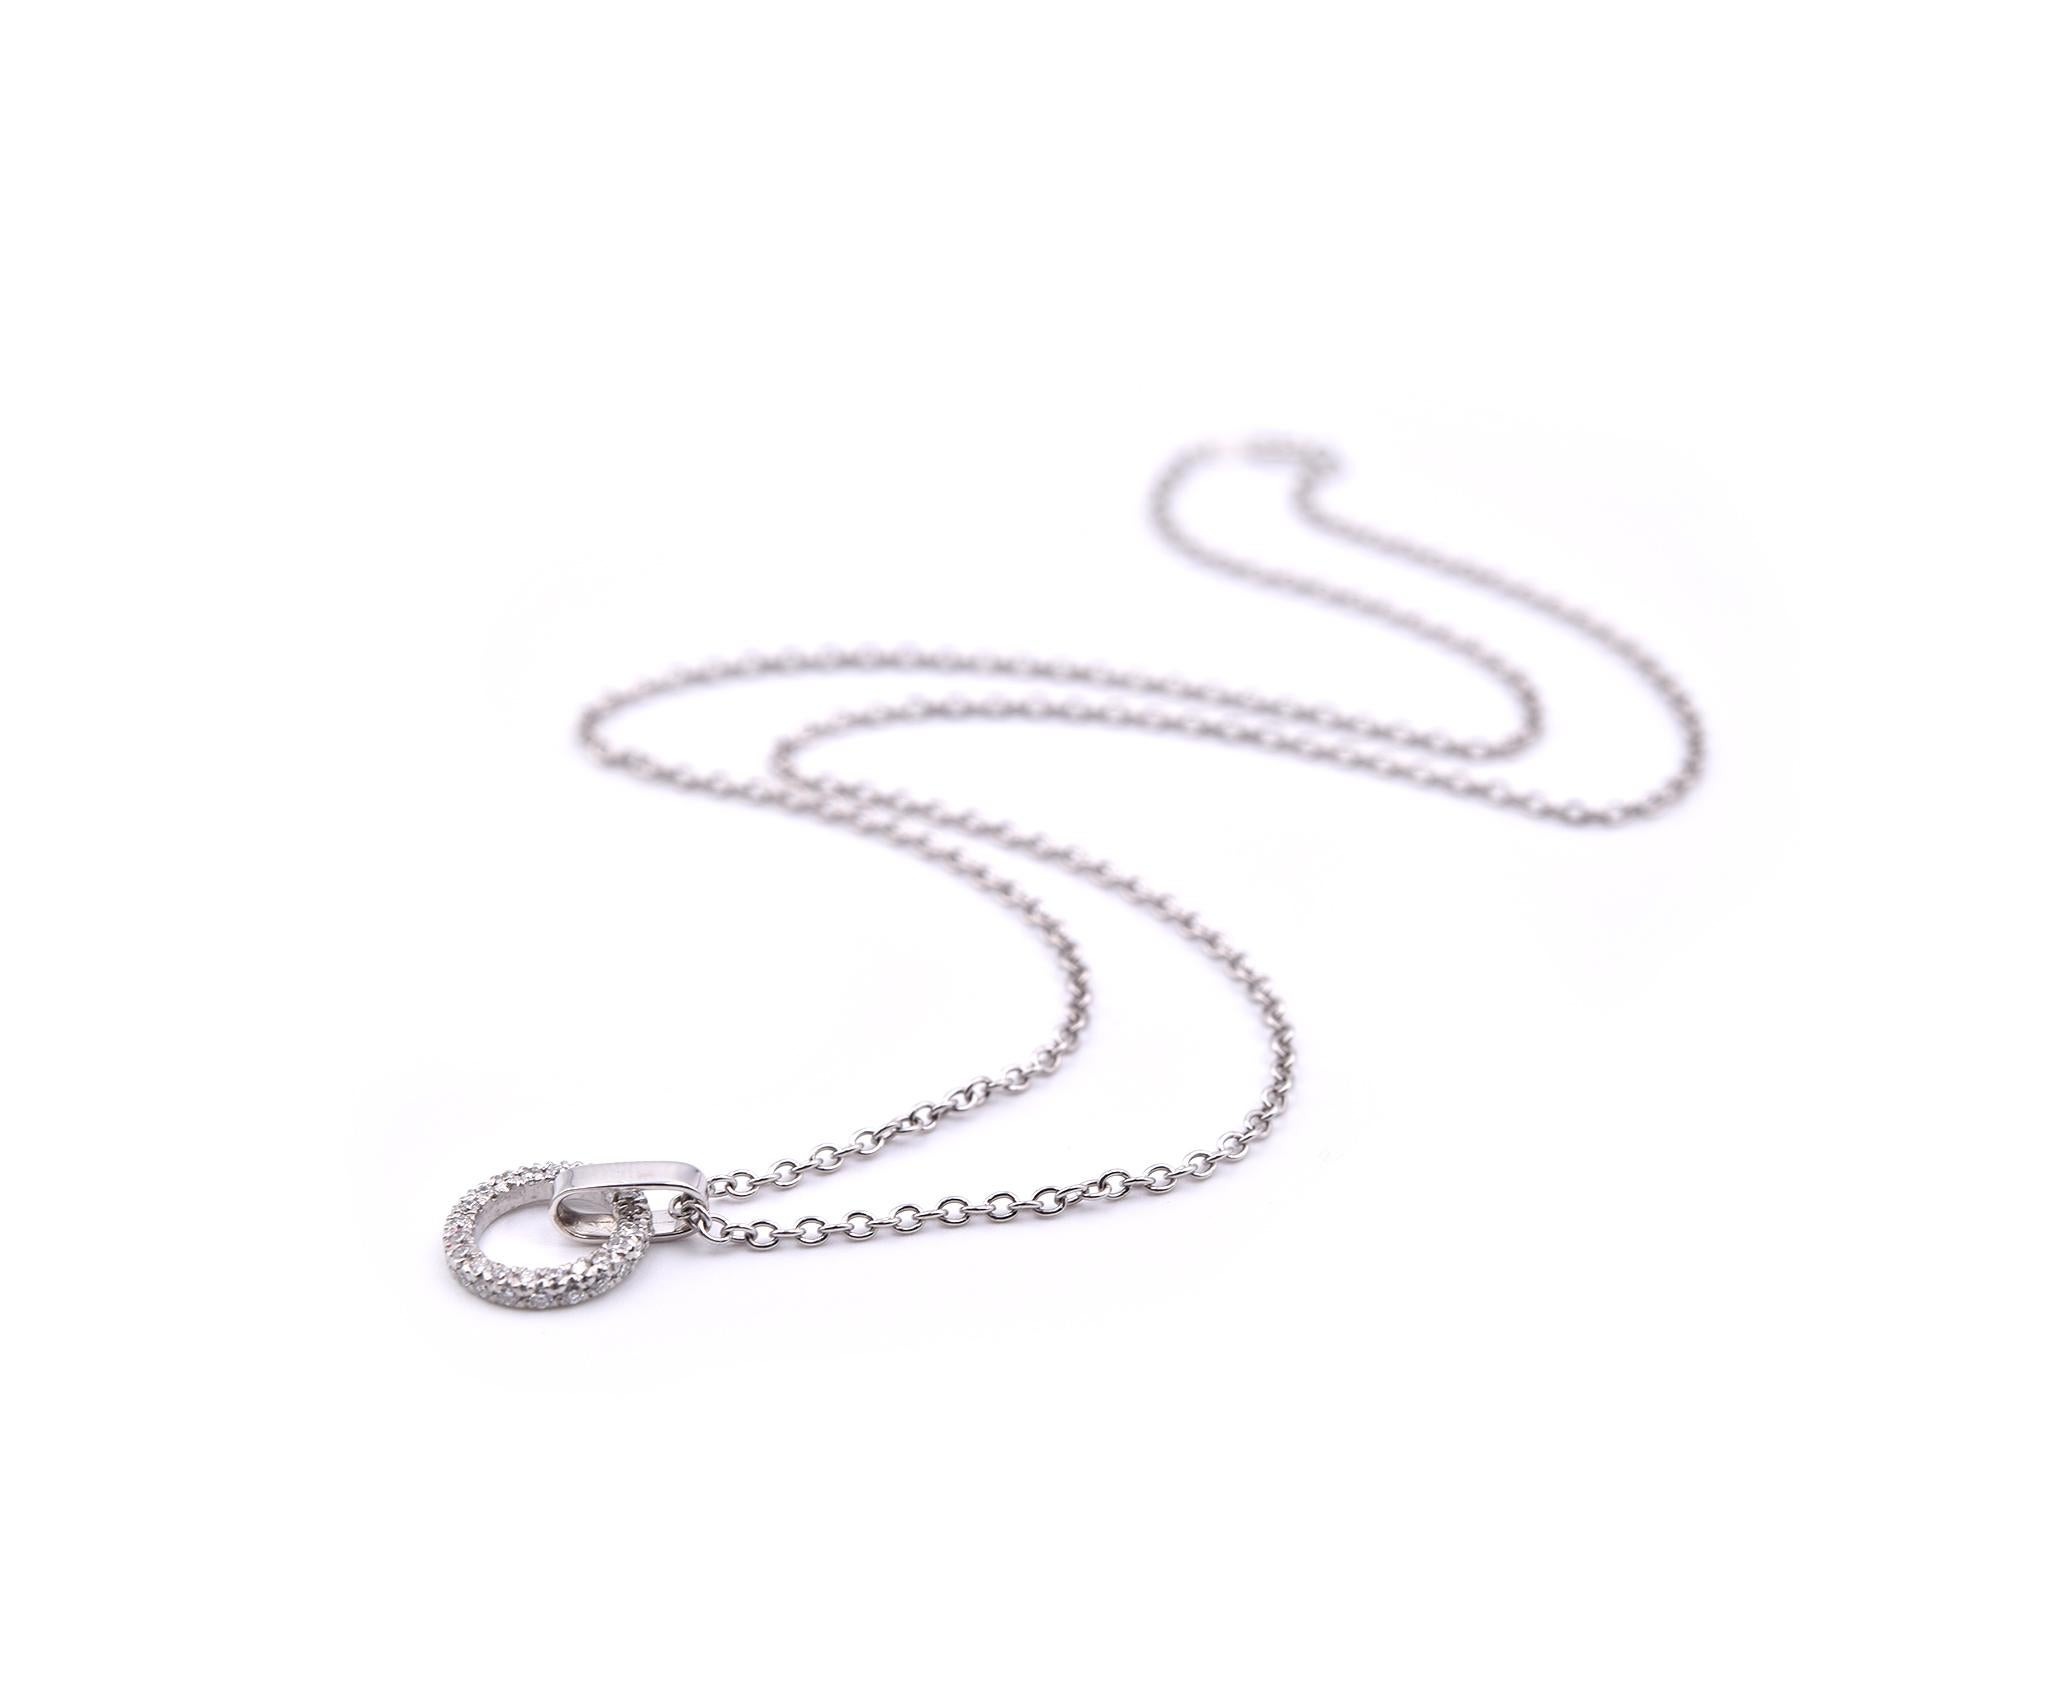 Designer: custom design
Material: 14k white gold
Diamond: 21 round brilliant cut= 0.16cttw
Color: G
Clarity: VS
Dimensions: necklace is 16” inches long, pendant is ½-inch long and it has a diameter 10.63mm
Weight: 3.14 grams